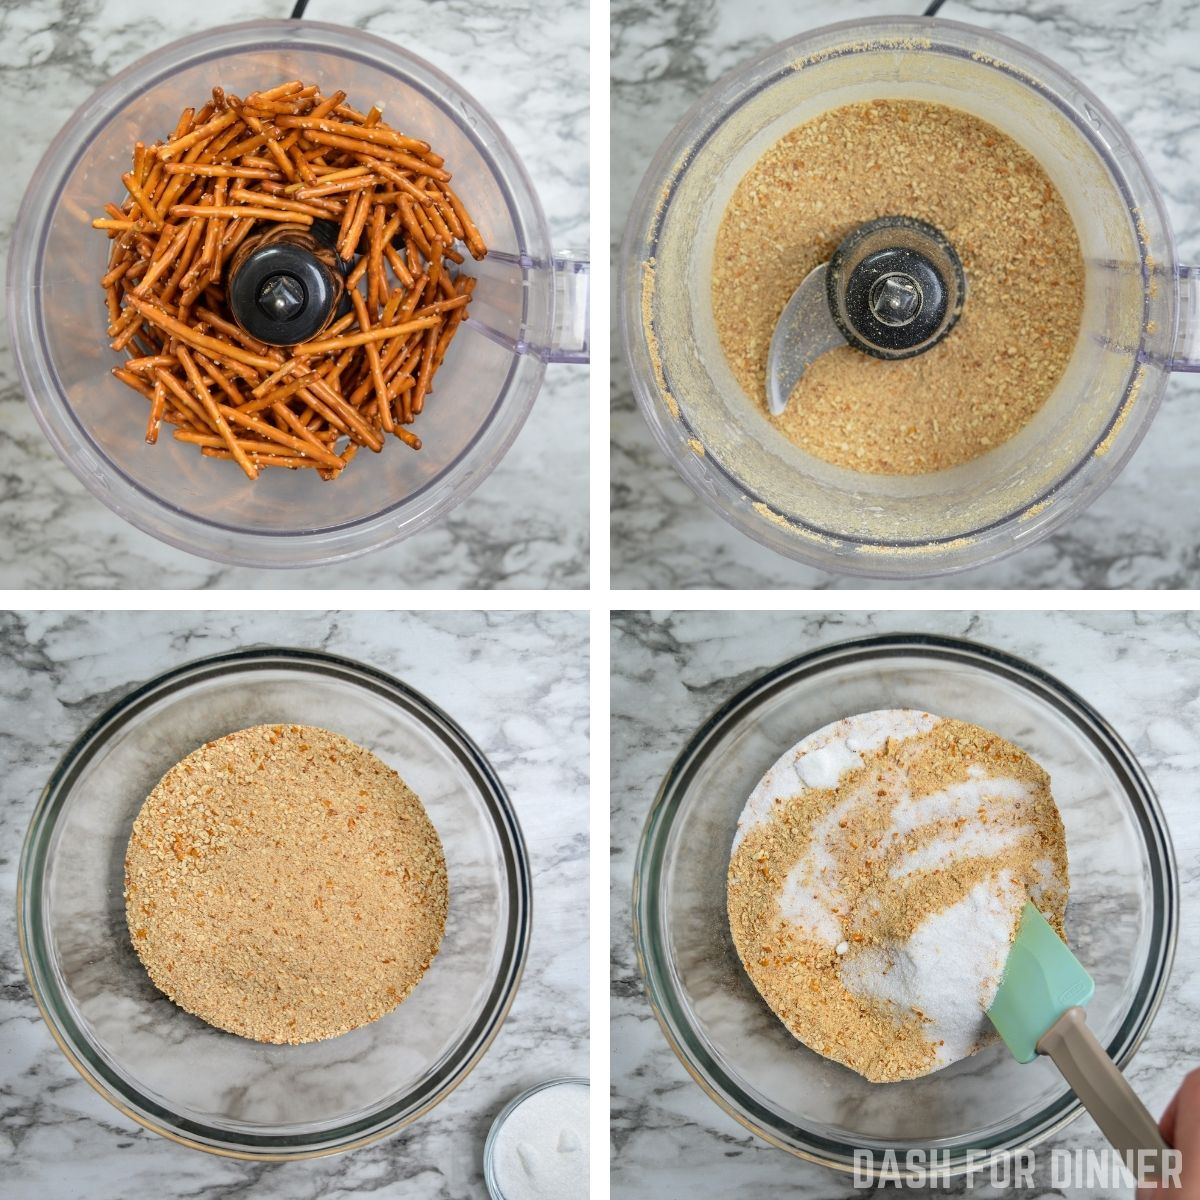 Crushed pretzels in a food processor to make crumbs